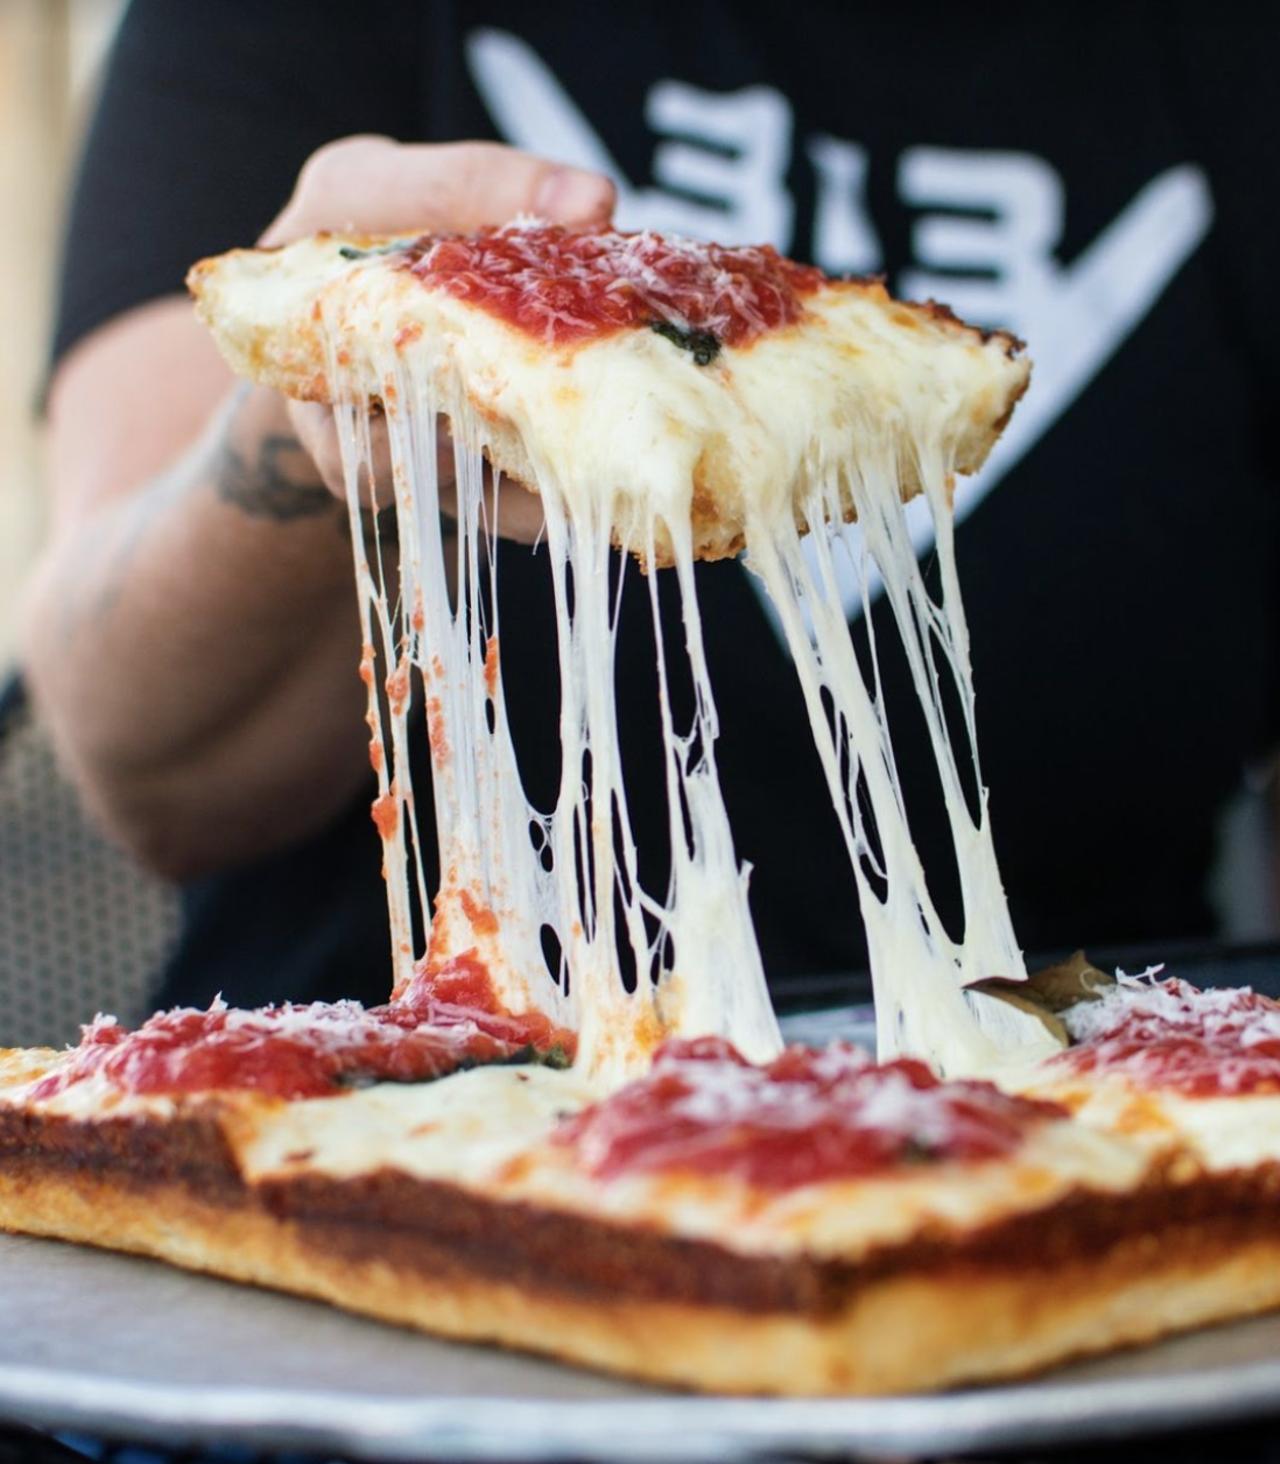 Via 313
8435 Wurzbach Rd., via313.com
Austin-based Via 313 will bring its Motor City-inspired, square-shaped deep dish pizza to San Antonio, with plans of opening a location near the Medical Center in late March. 
Photo via Instagram / Via313 